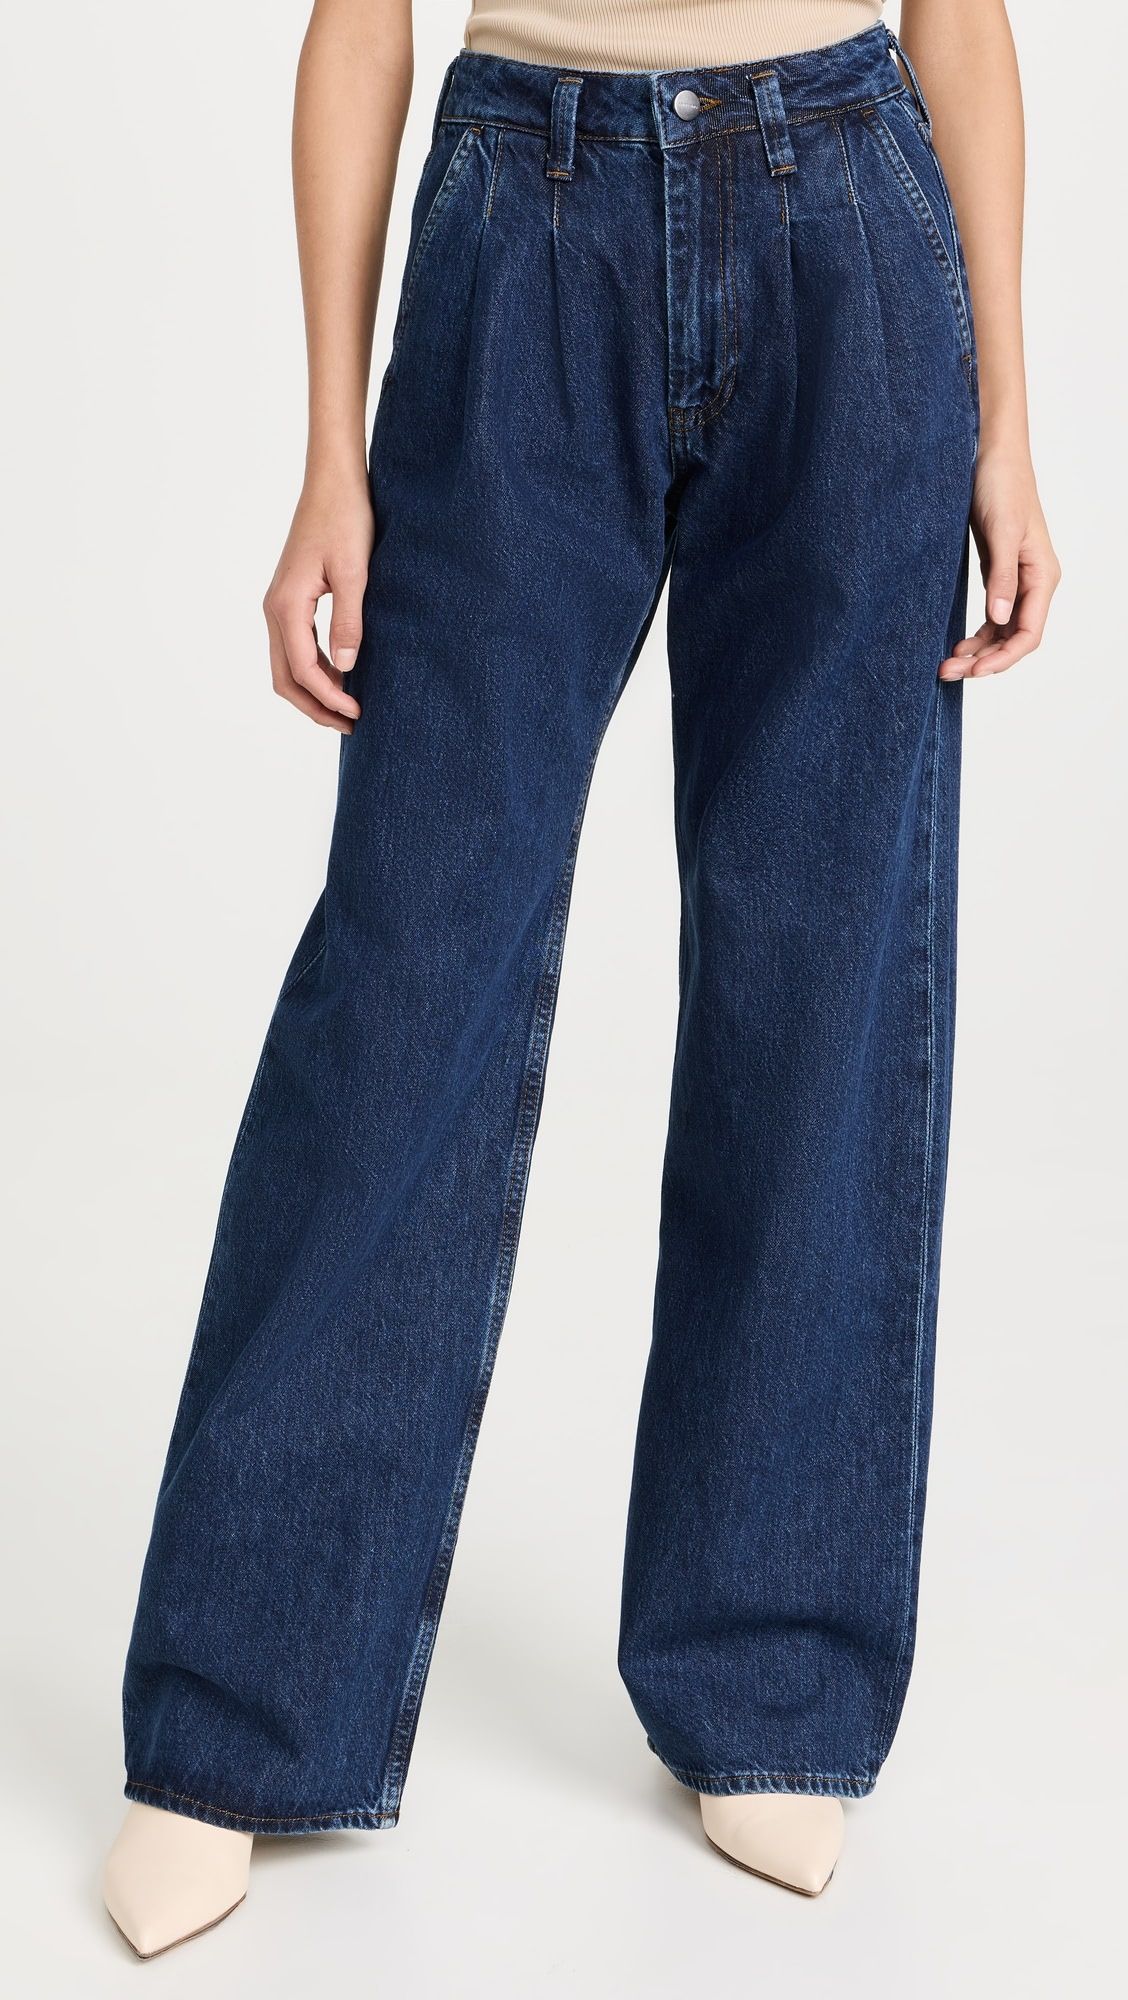 Carrie Jeans | Shopbop